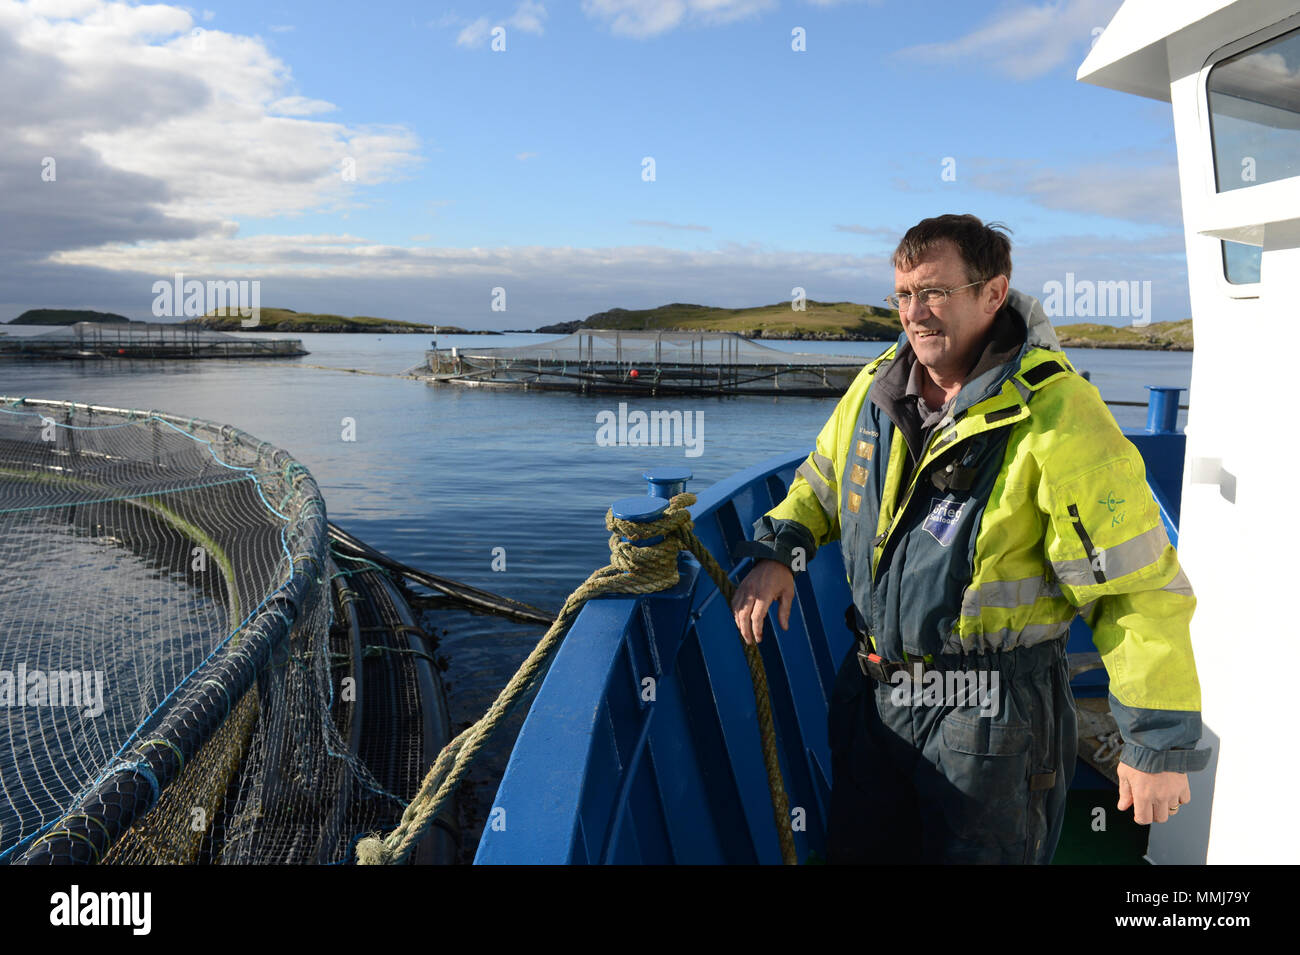 Salmon farmer on a salmon boat tying it up to cages before feeding the fish in the cages Stock Photo